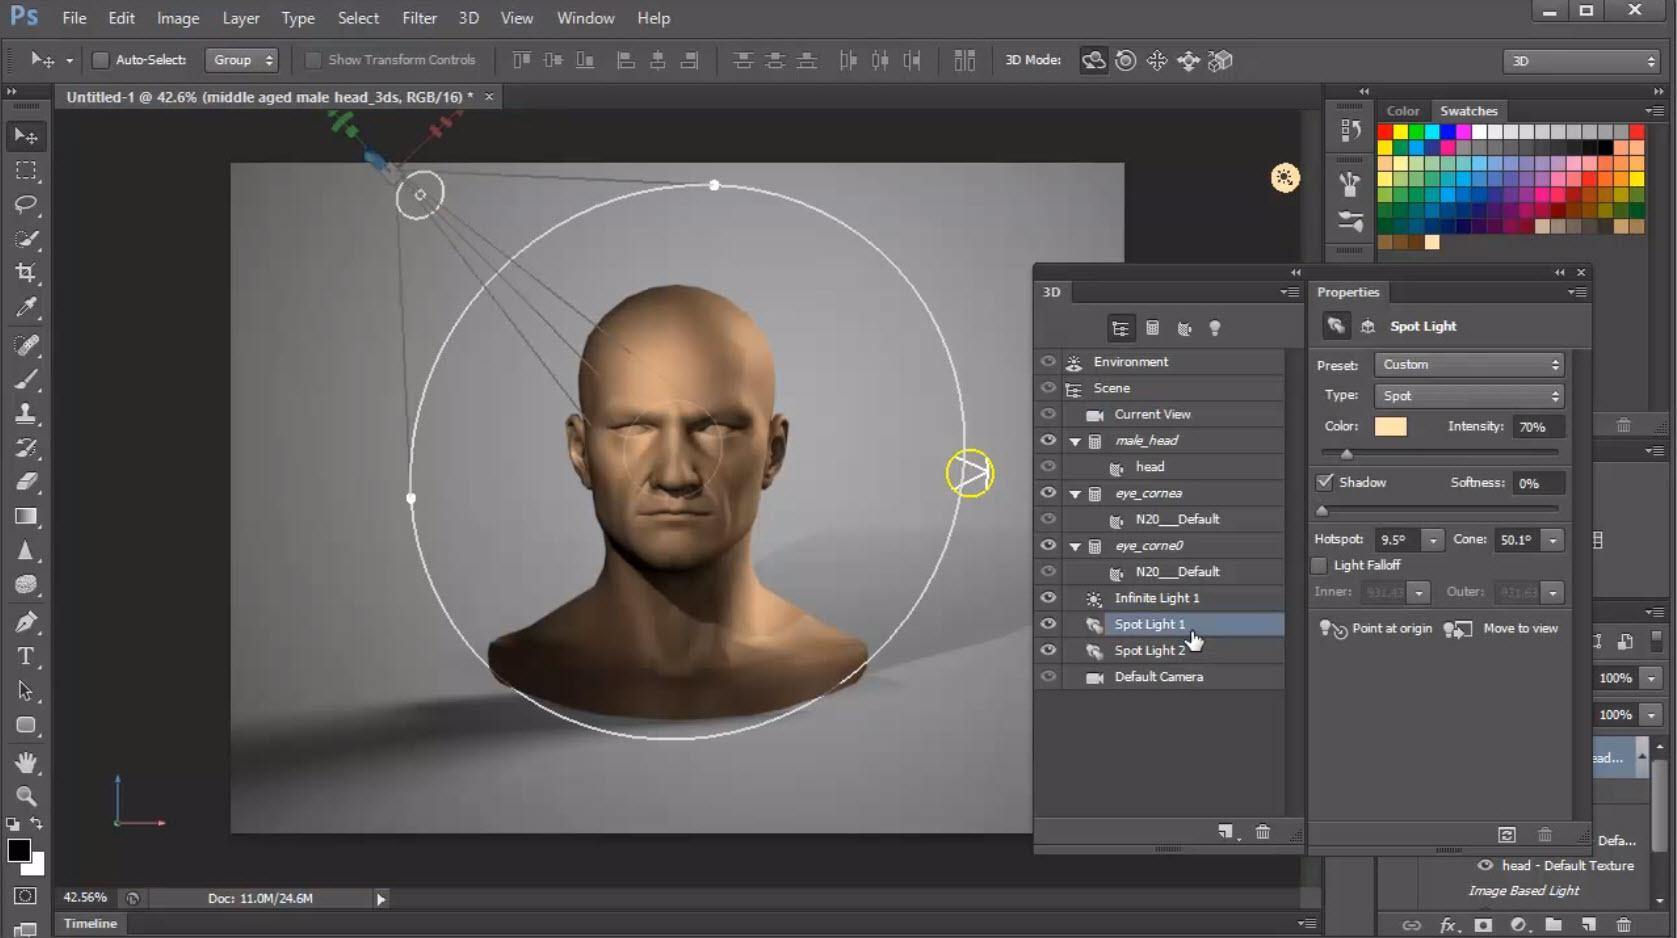 Adobe Adds New 3D Printing Features to Photoshop CC With Update 2014.1